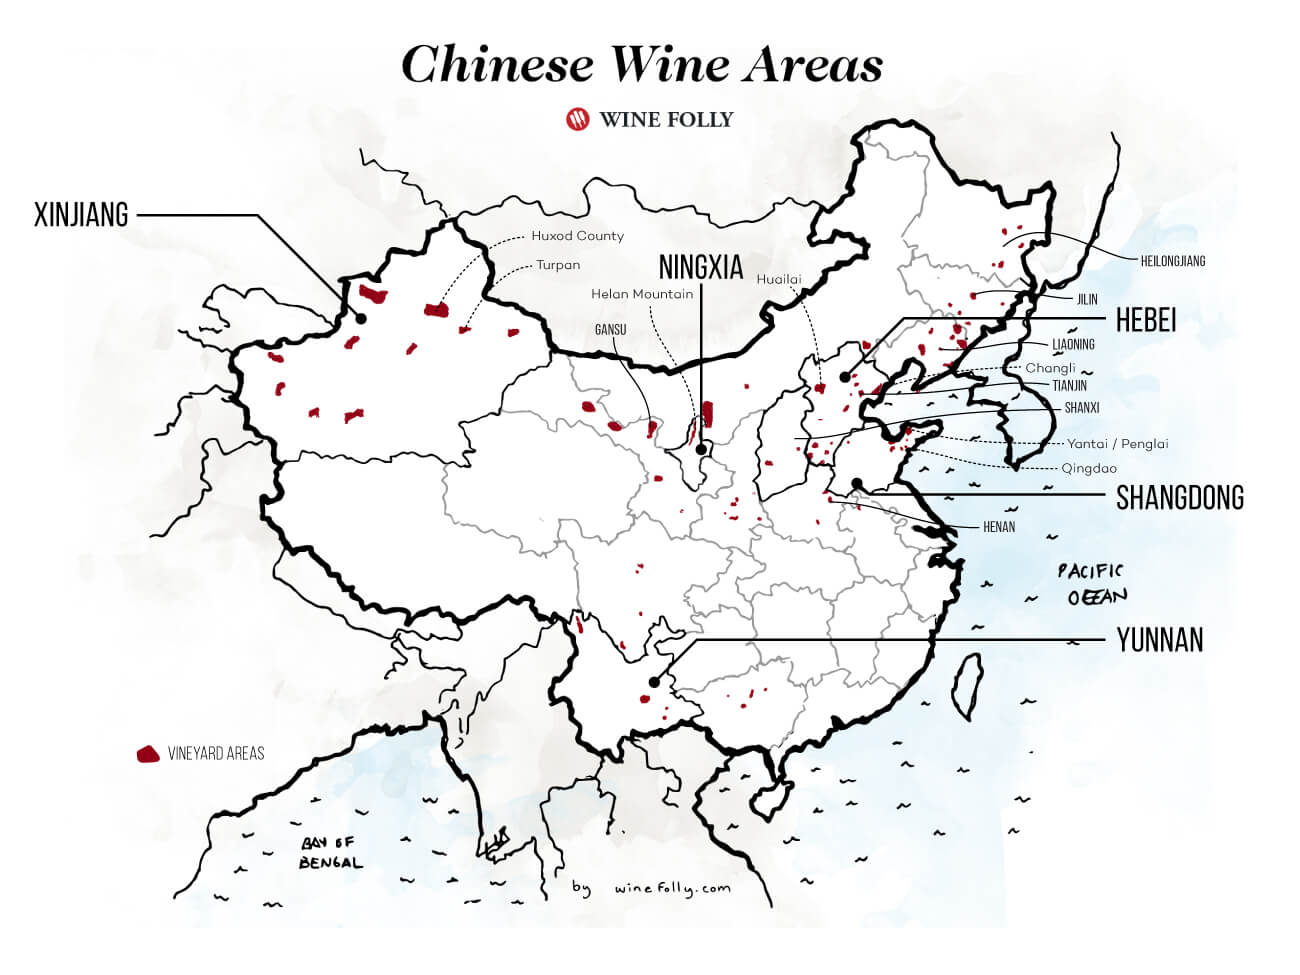 China Wine Region Map Detail - By Wine Folly 2020